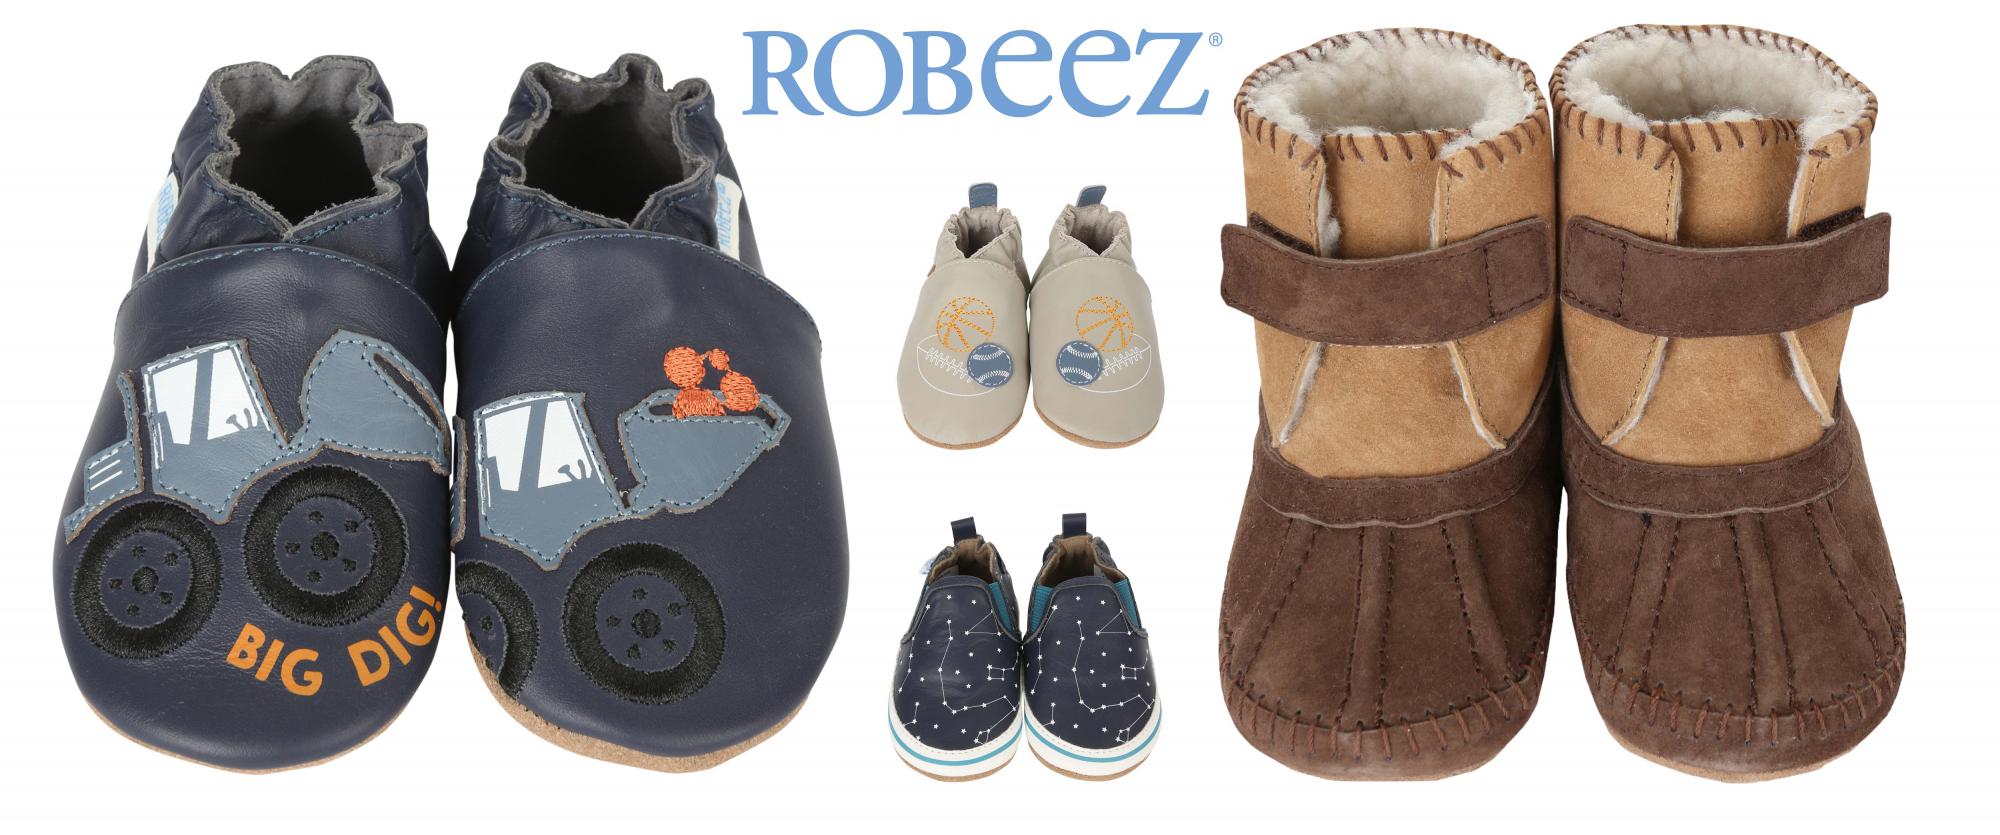 robeez leather shoes